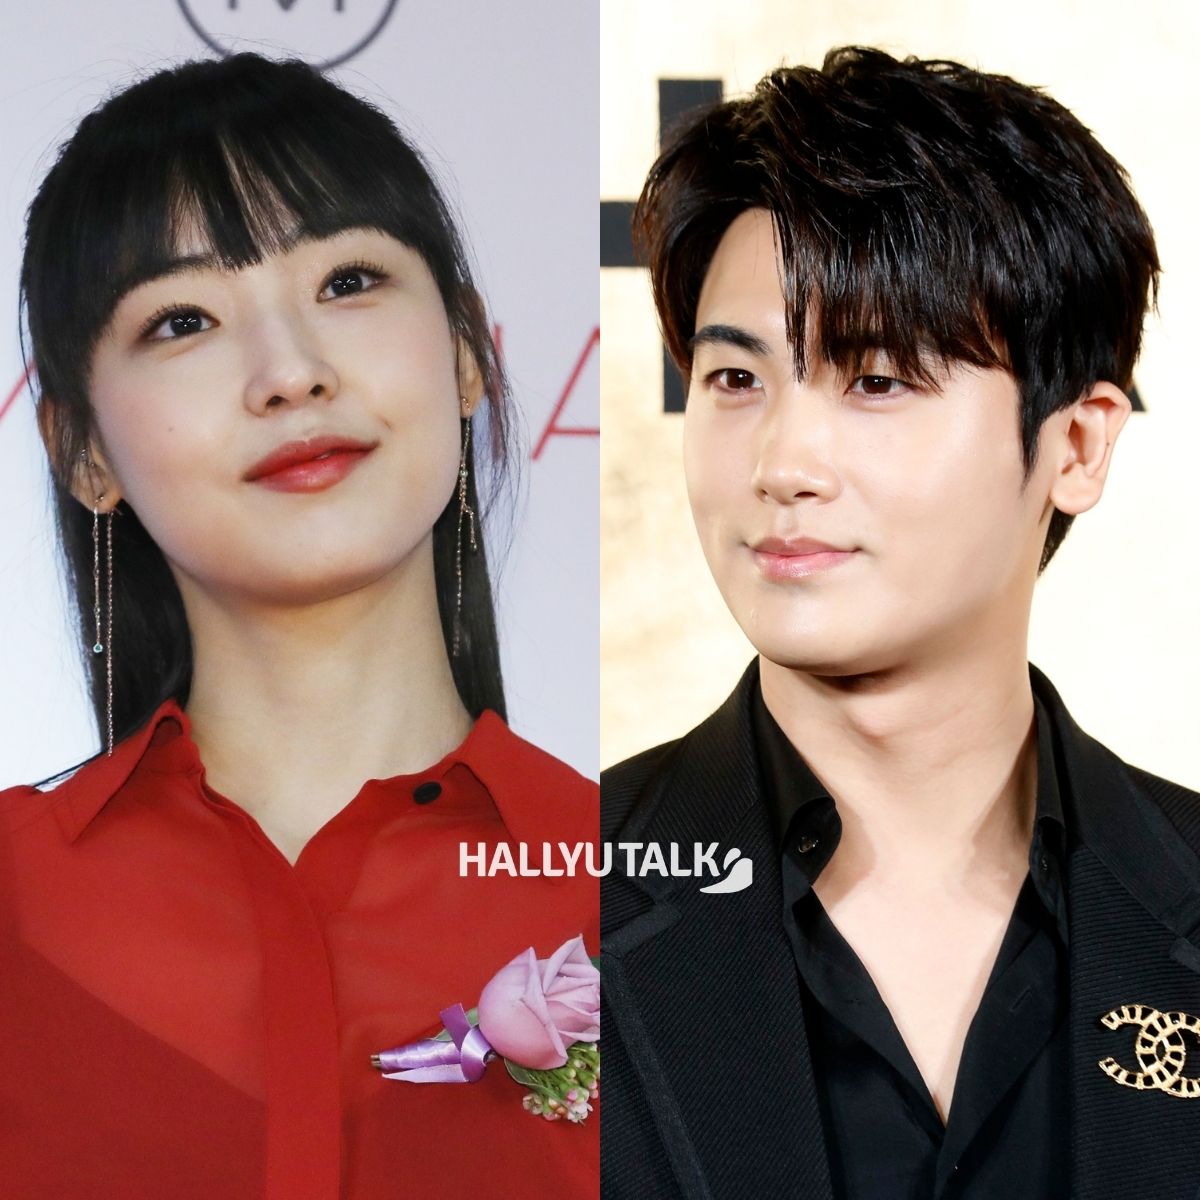 Jeon So Nee and Park Hyung Sik currently considering lead offers for an upcoming romantic drama